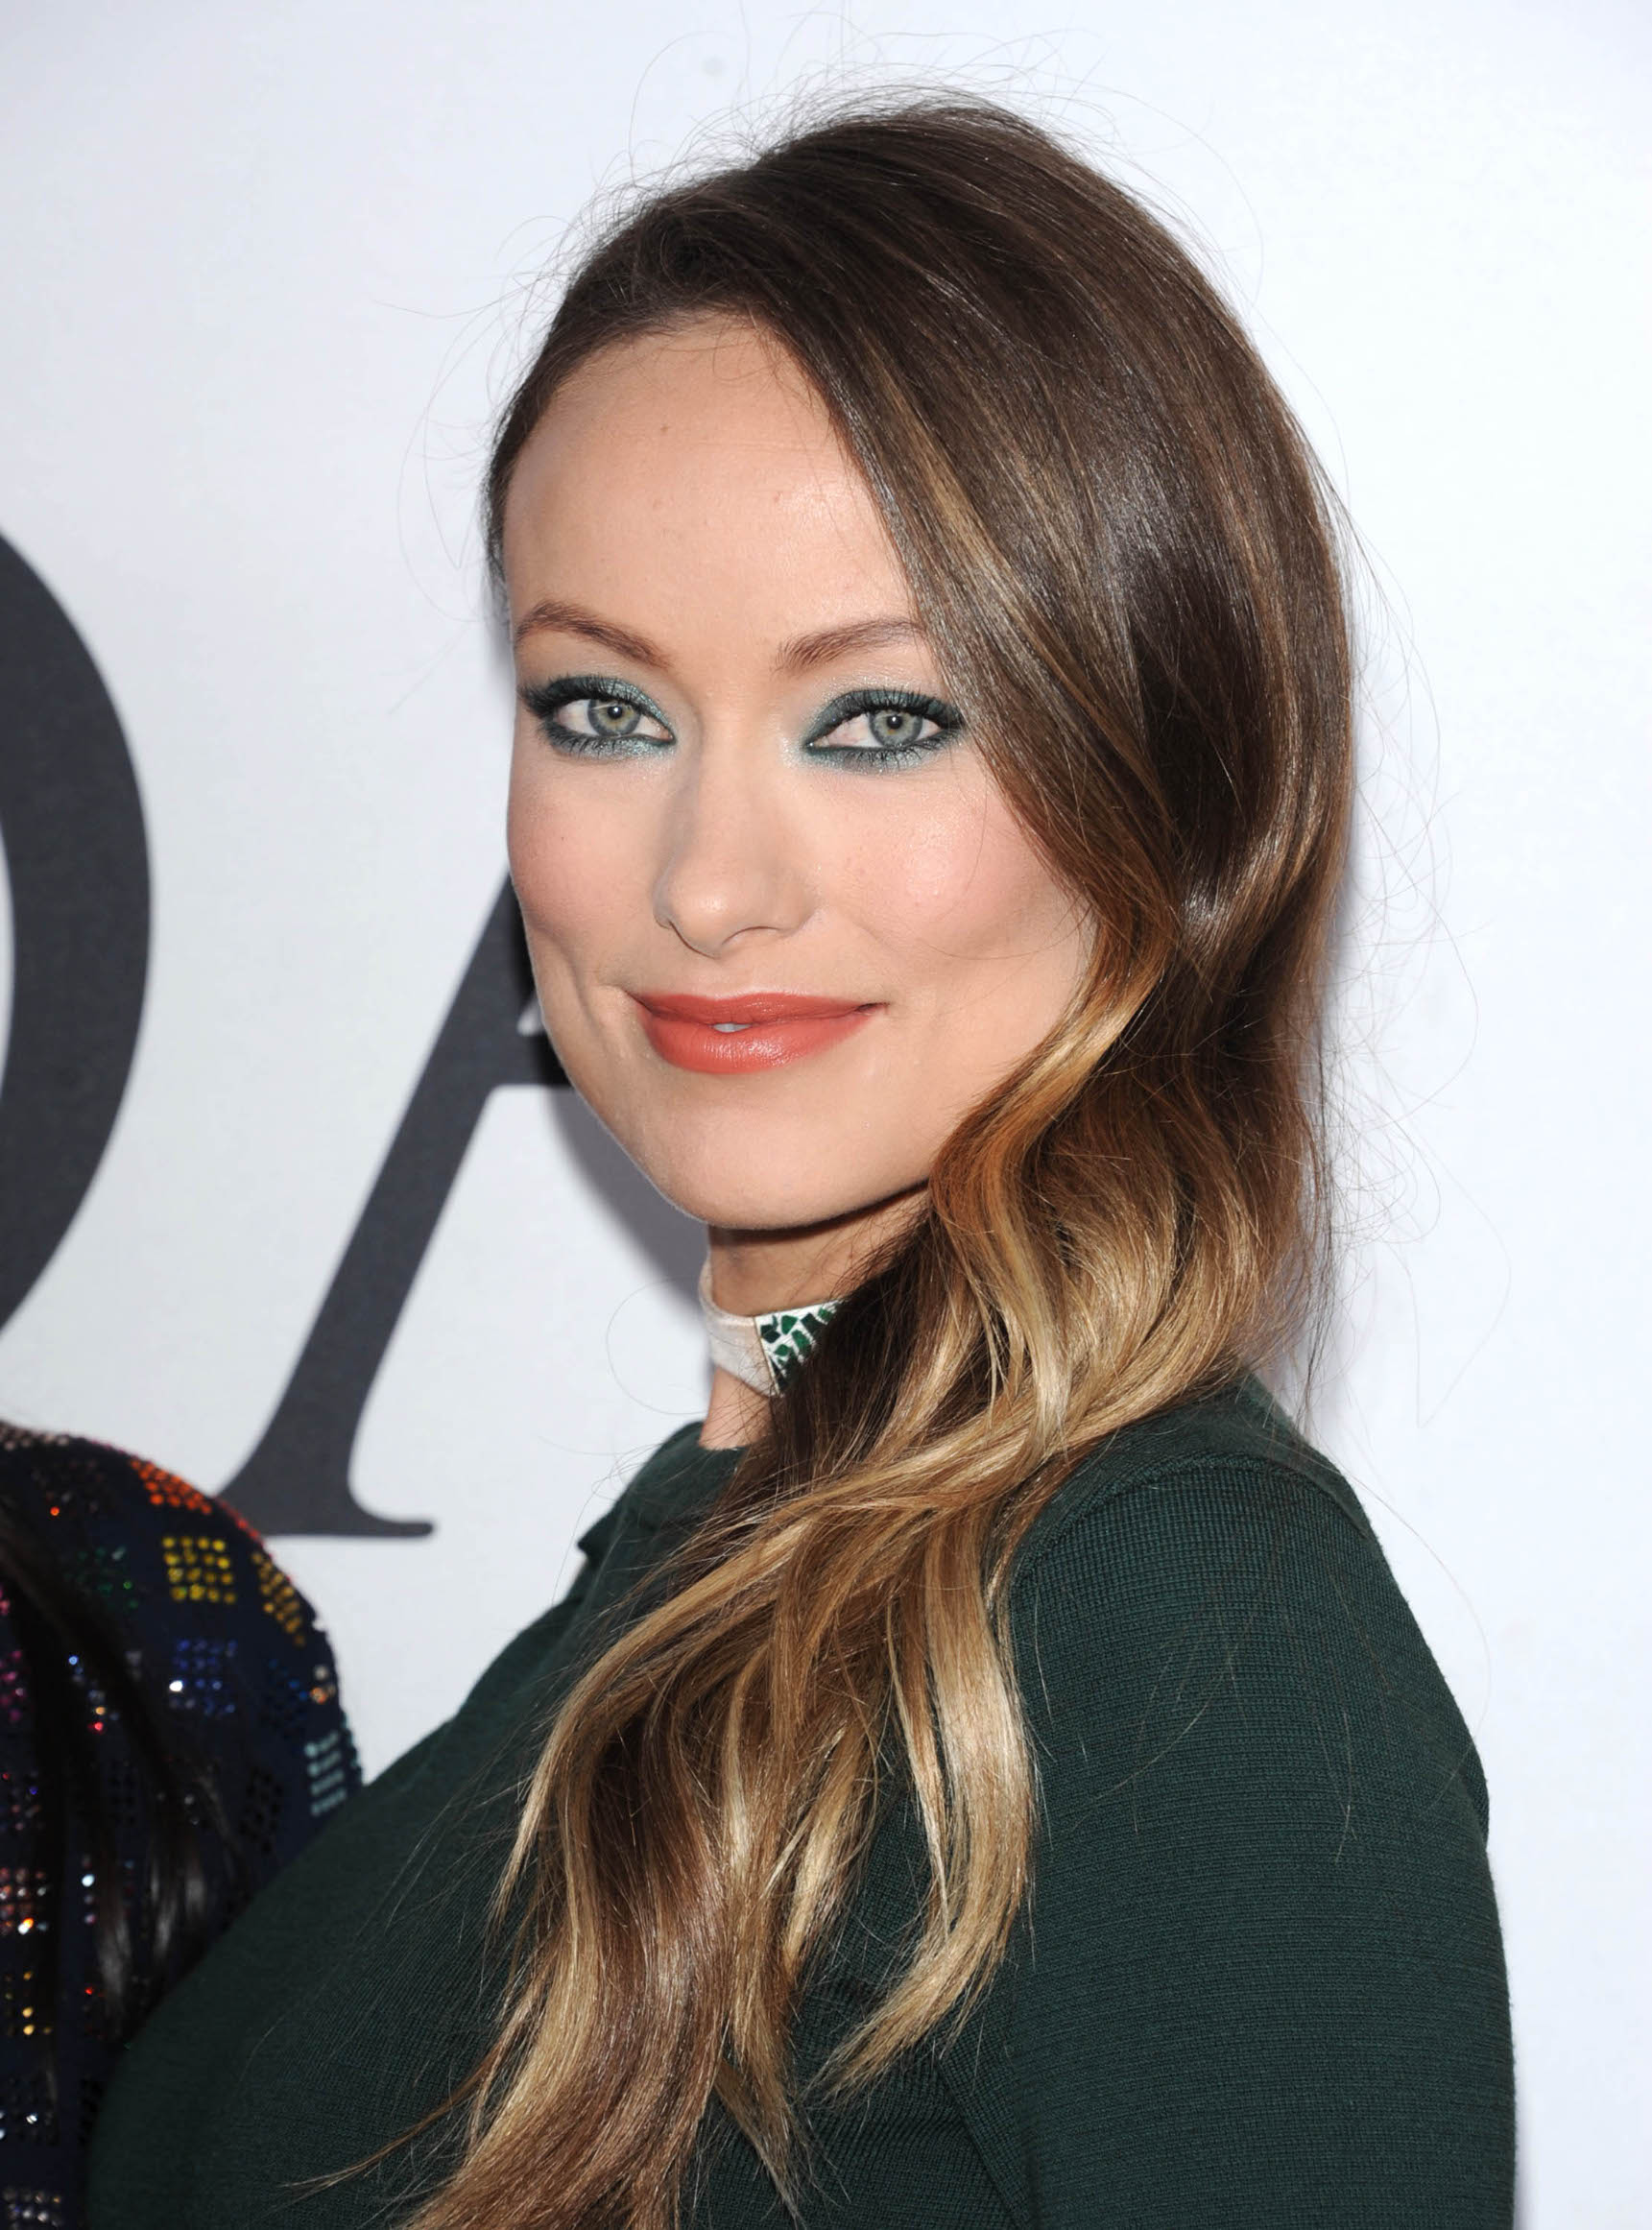 June 6, 2016: Olivia Wilde during the 2016 CFDA Awards Winners Walk, Hosted by Swarovski, held at the Hammerstein Ball Room in New York City., Image: 289156314, License: Rights-managed, Restrictions: CODE000, Model Release: no, Credit line: Jennifer Graylock / INSTAR Images / Profimedia